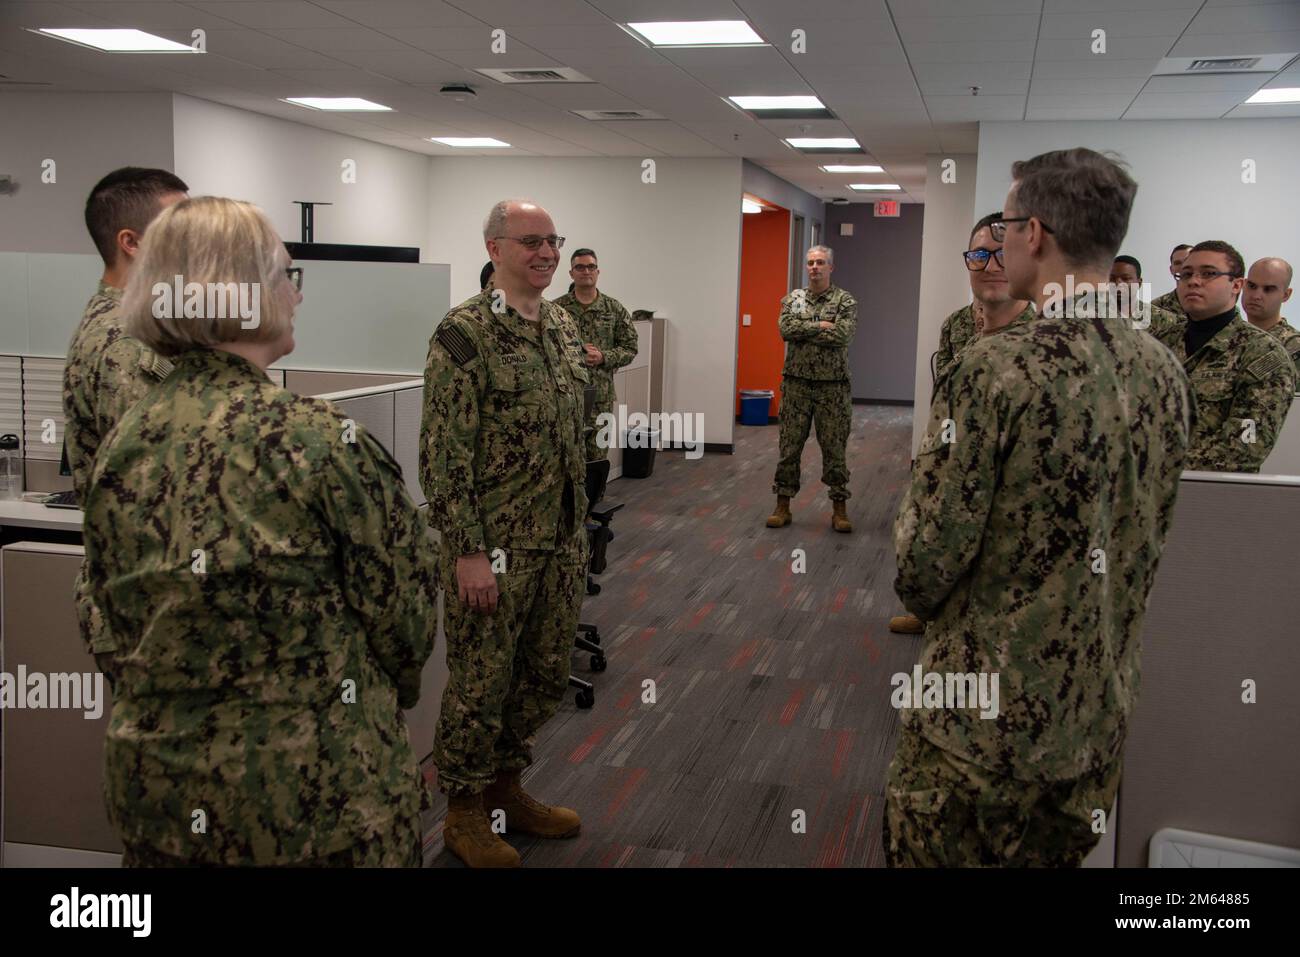 220330-N-XK809-1038 FORT GEORGE G. MEADE, Md. (March 30, 2022) Rear Adm. Stephen Donald, right, Vice Commander, U.S. Fleet Cyber Command / U.S. 10th Fleet, speaks to U.S. Navy Reserve Sailors during Operation Cyber Dragon. During Operation Cyber Dragon, conducted Mar. 7 - Apr. 1, Reserve Sailors assigned U.S. Fleet Cyber Command/U.S. 10th Fleet, conducted scanning of the Navy's unclassified network to identify, remediate and implement corrective actions to reduce vulnerabilities. Stock Photo